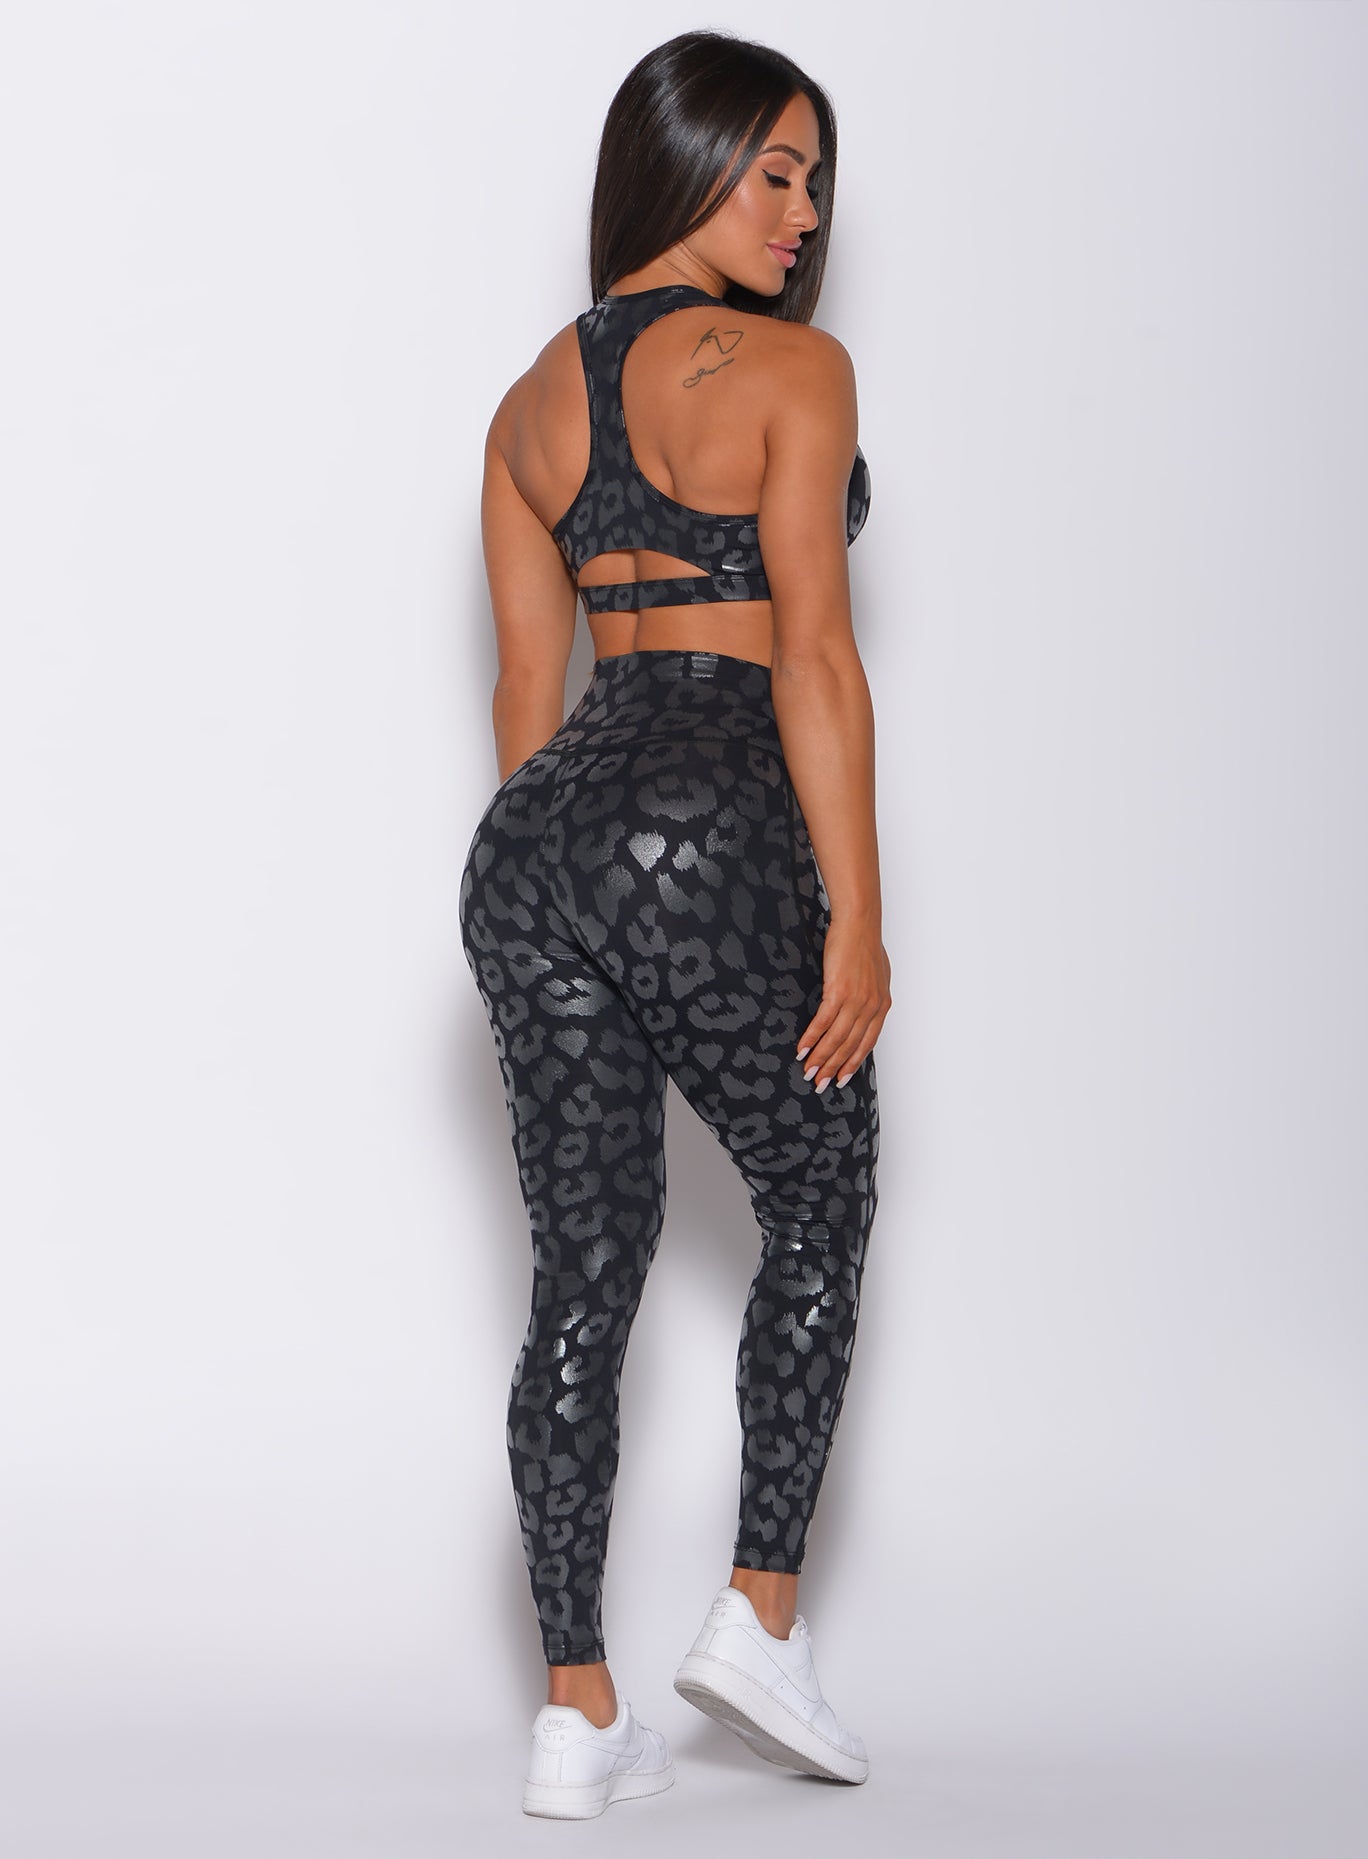 Back  profile view of a model wearing our shine leopard leggings in Black Leopard color along with the matching sports bra